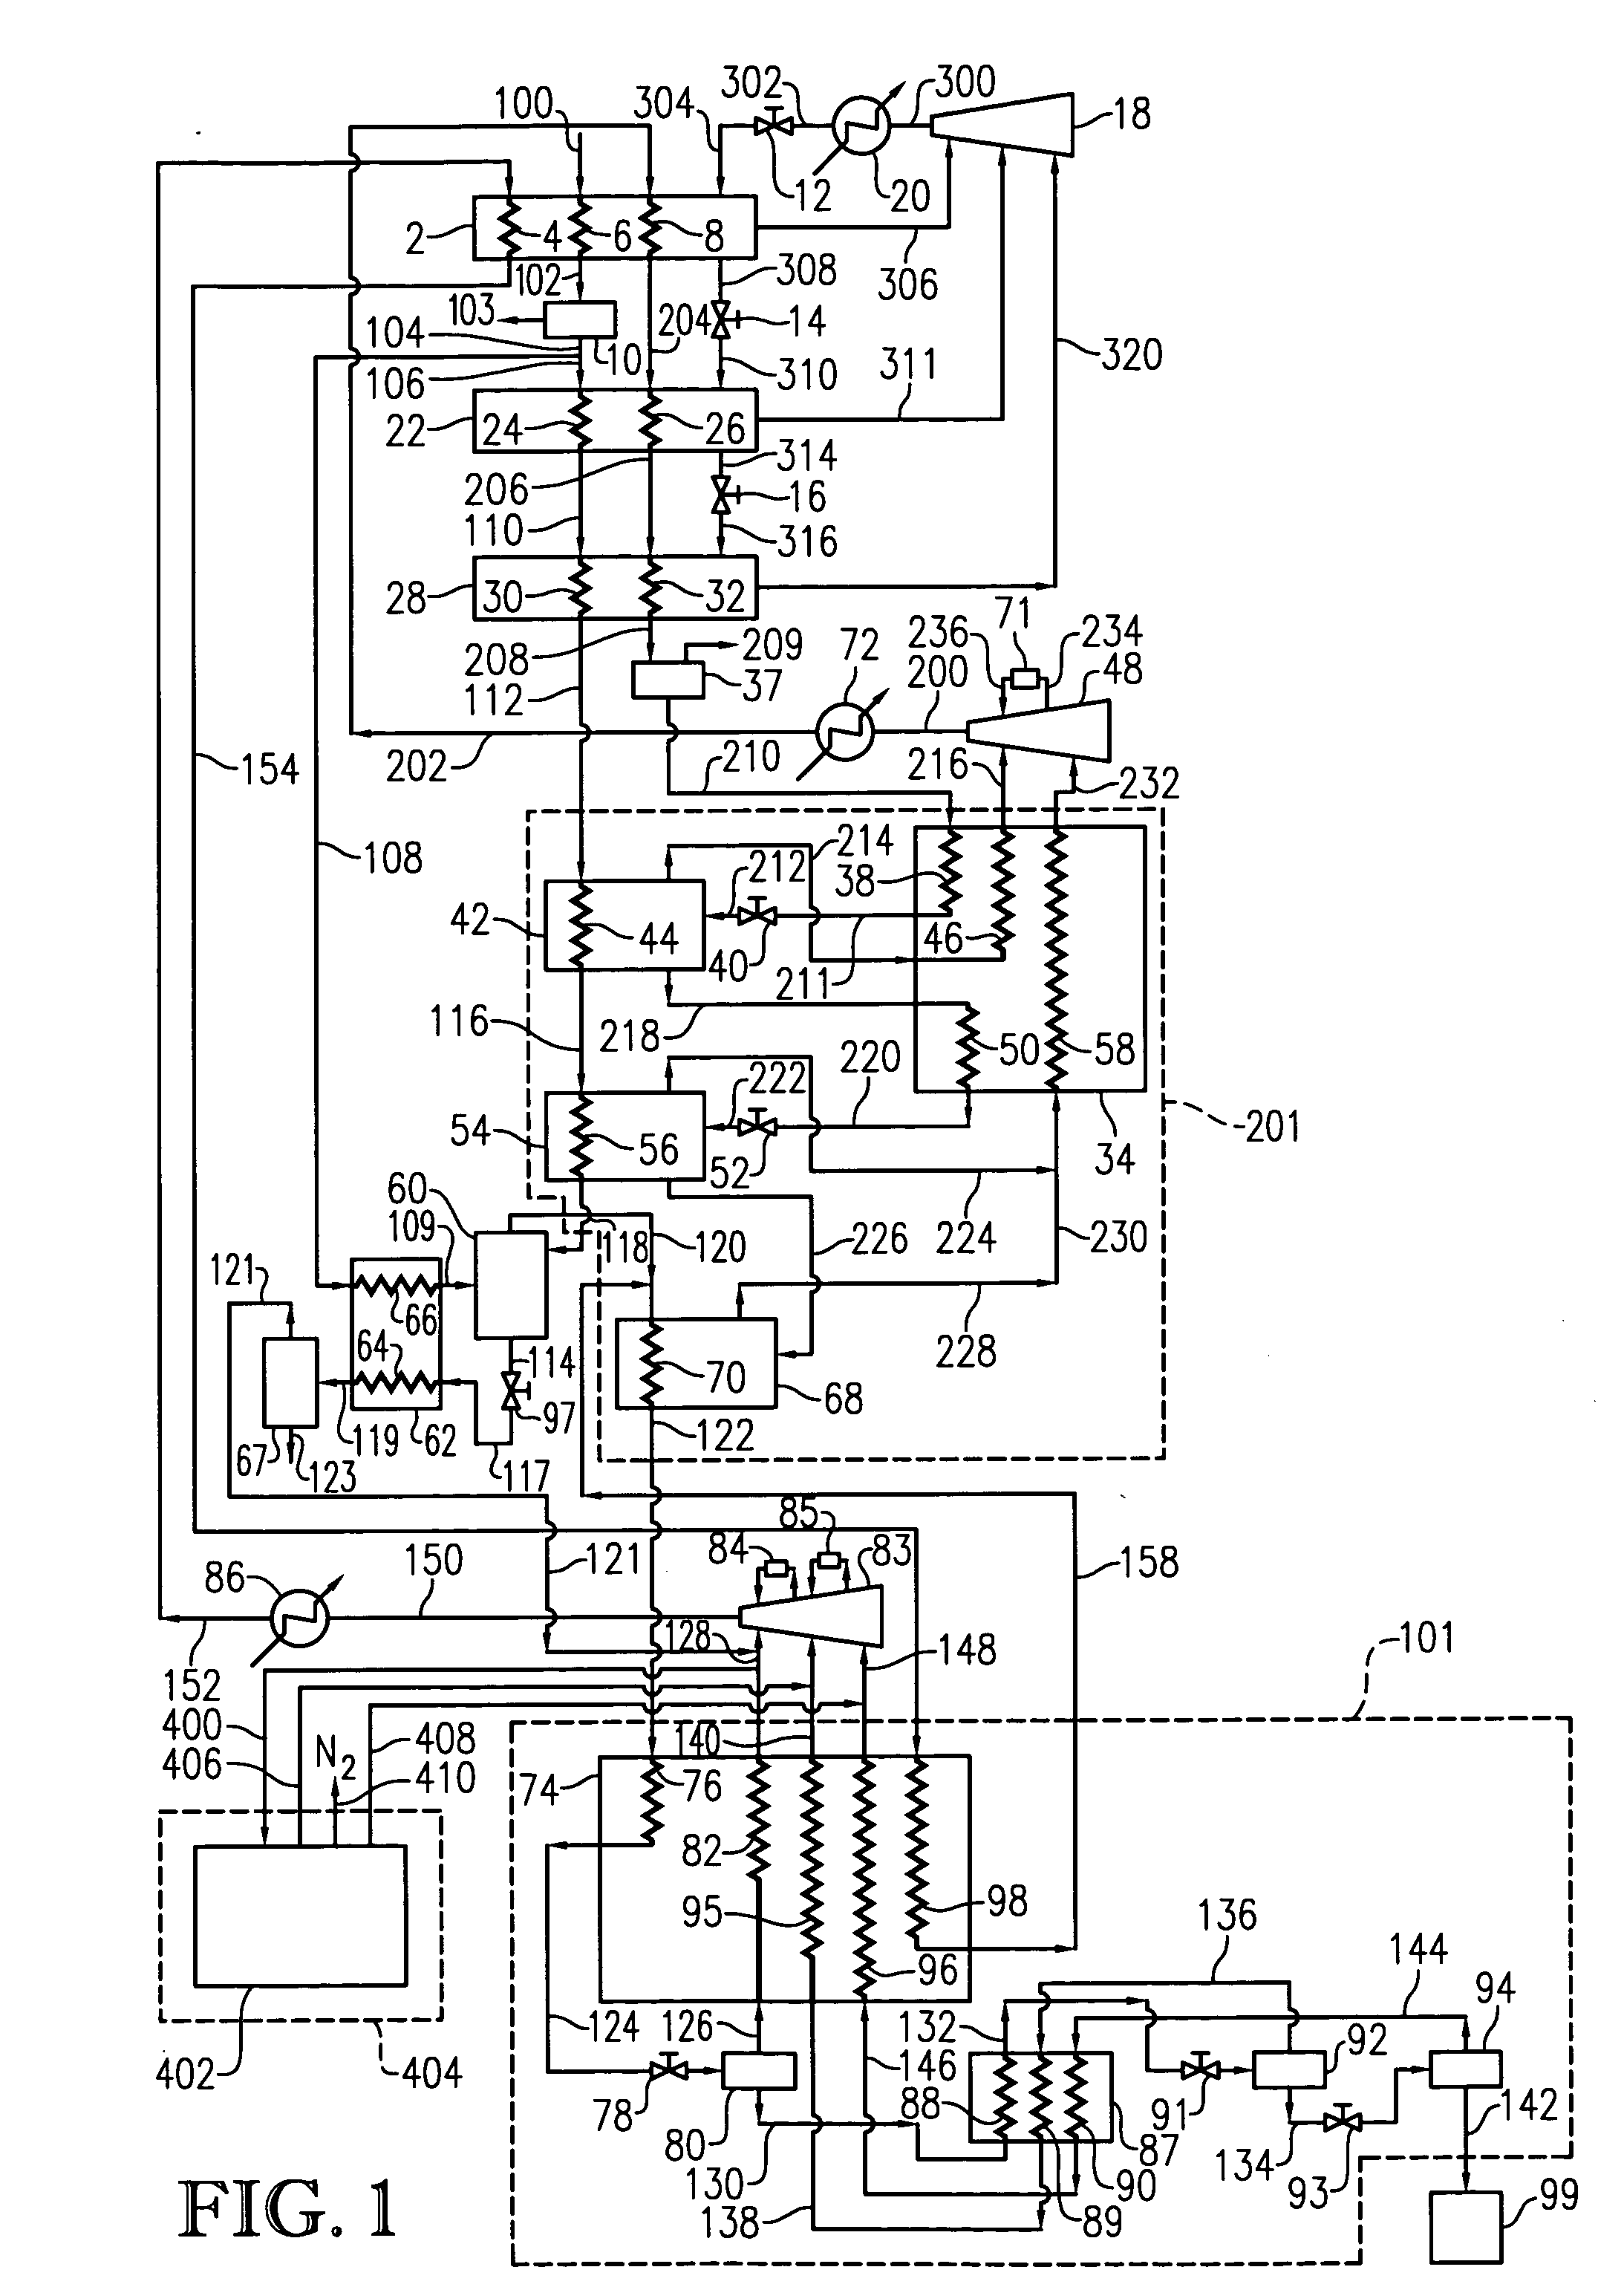 LNG system with warm nitrogen rejection